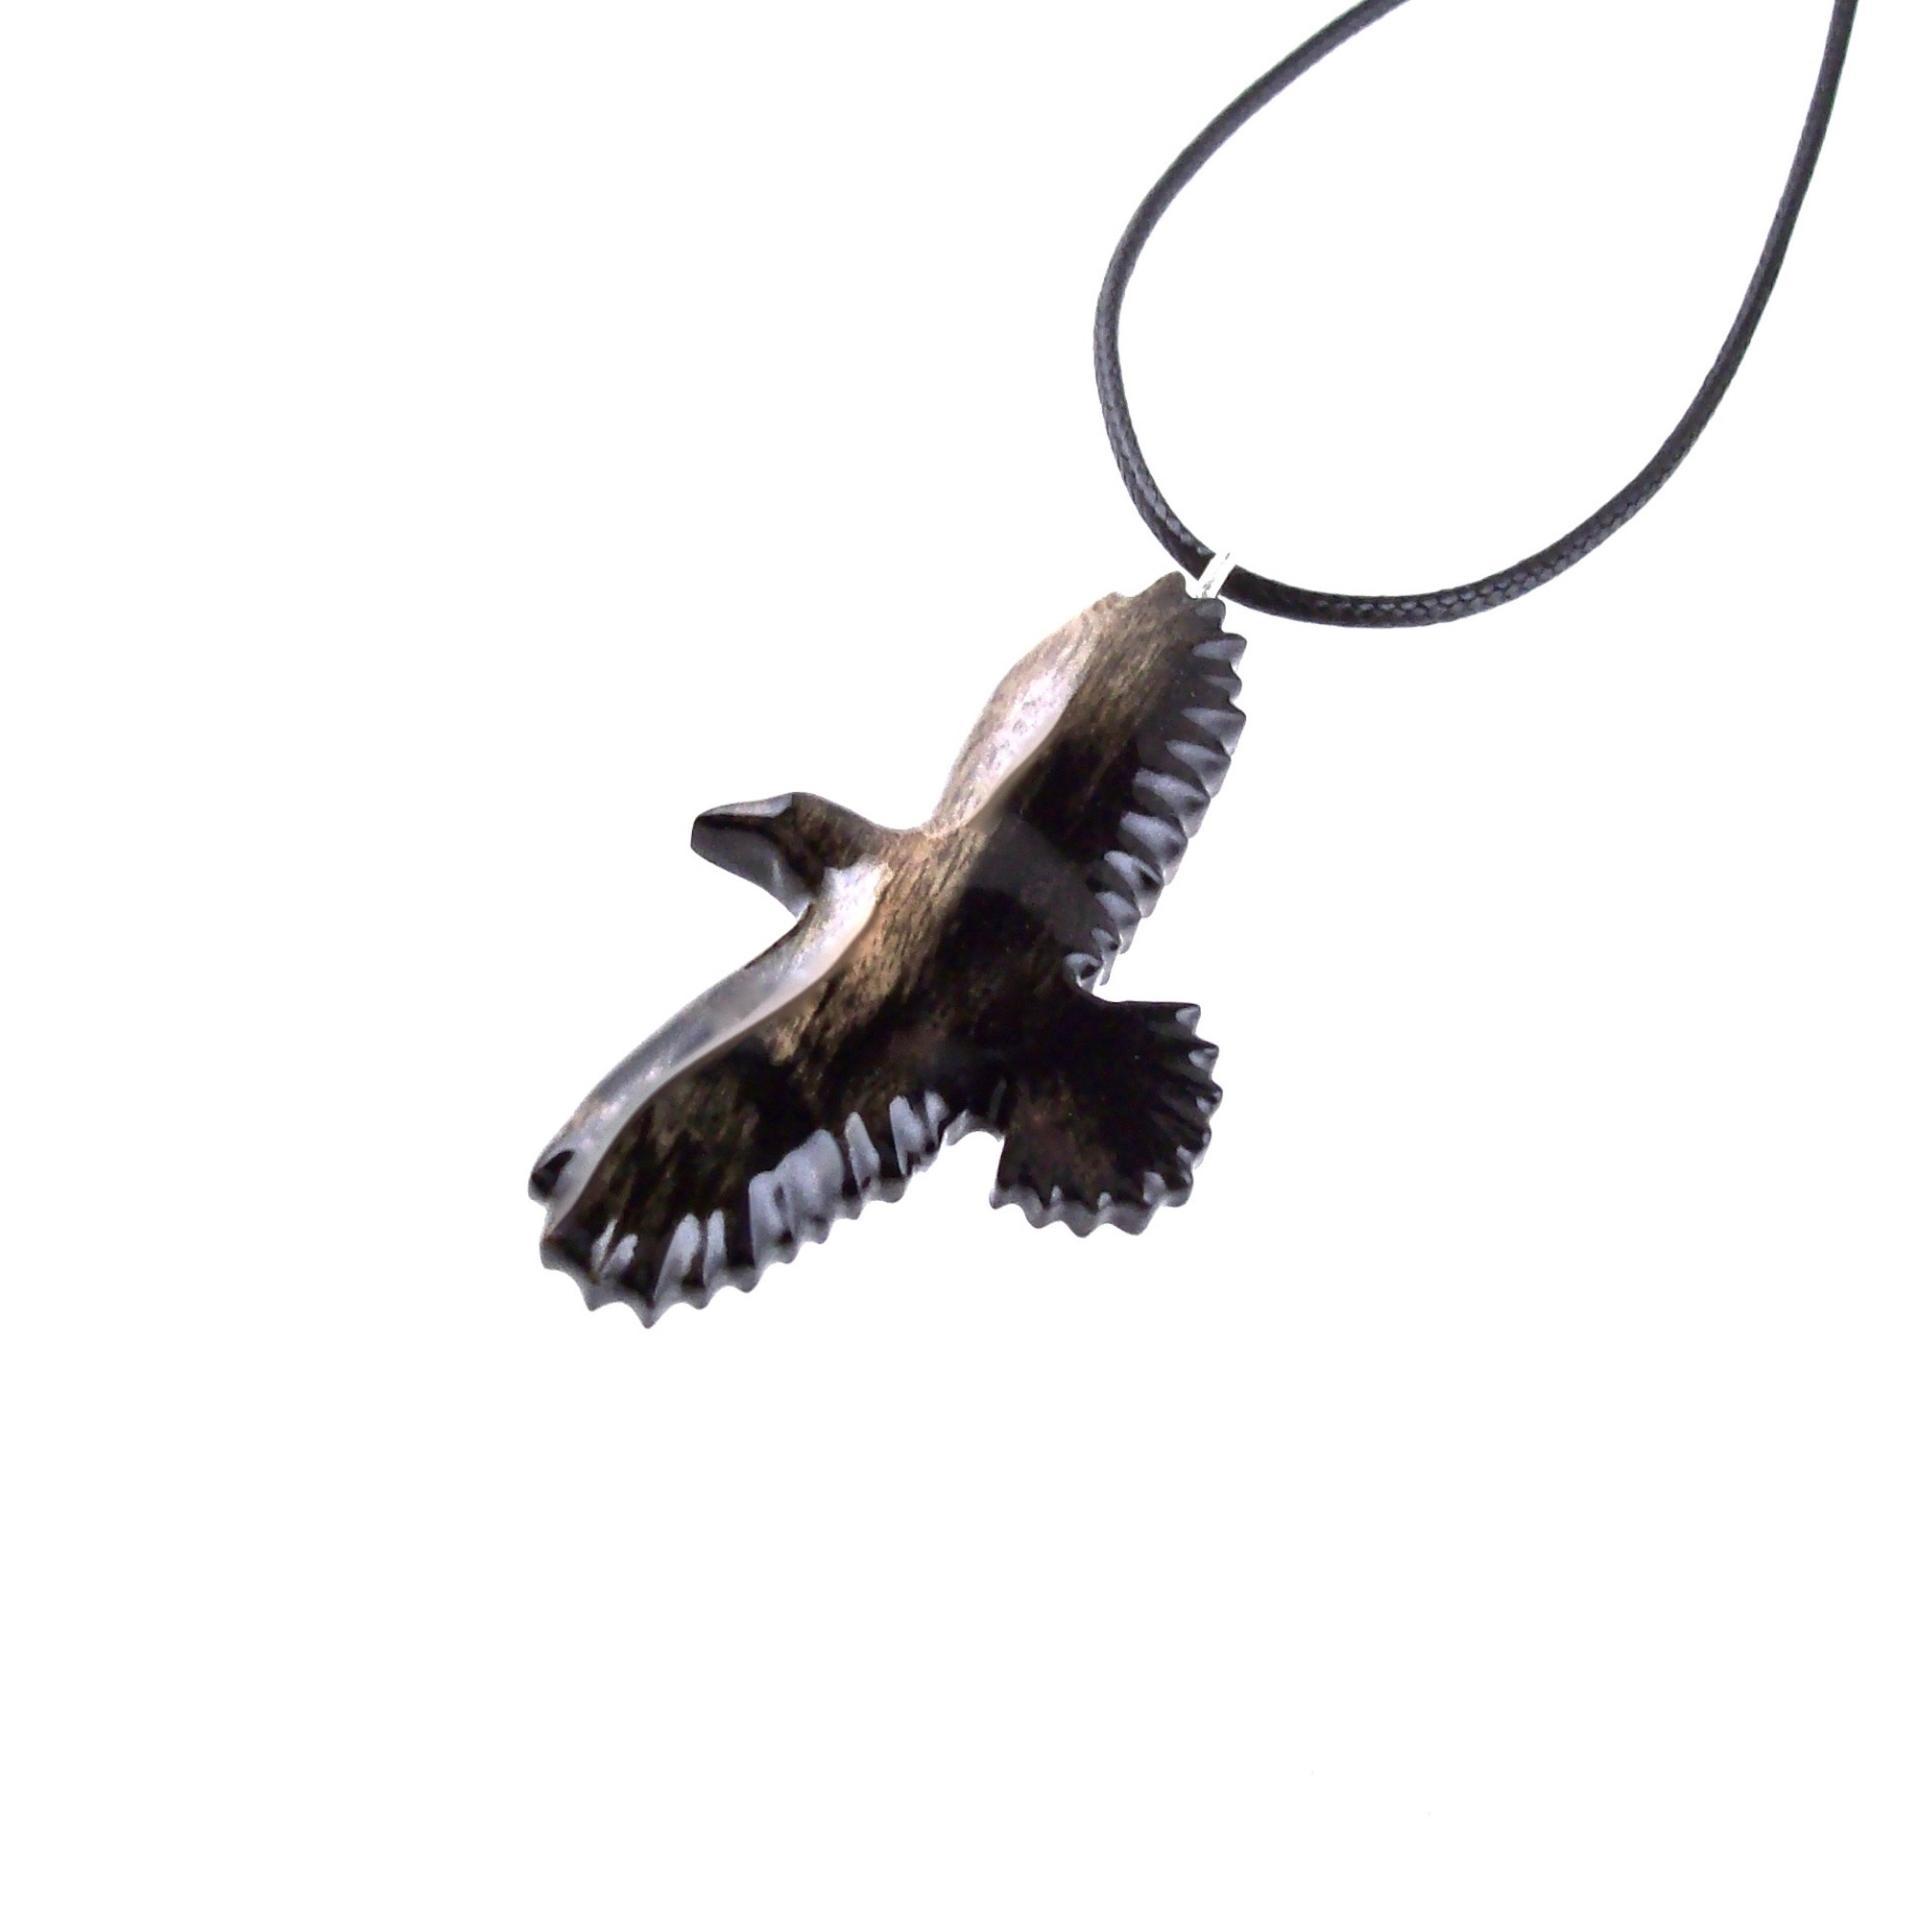 Hand Carved Crow Pendant, Raven Necklace, Wooden Raven Pendant, Wood Crow Necklace, Totem Spirit Animal Jewelry Gift for Him Her